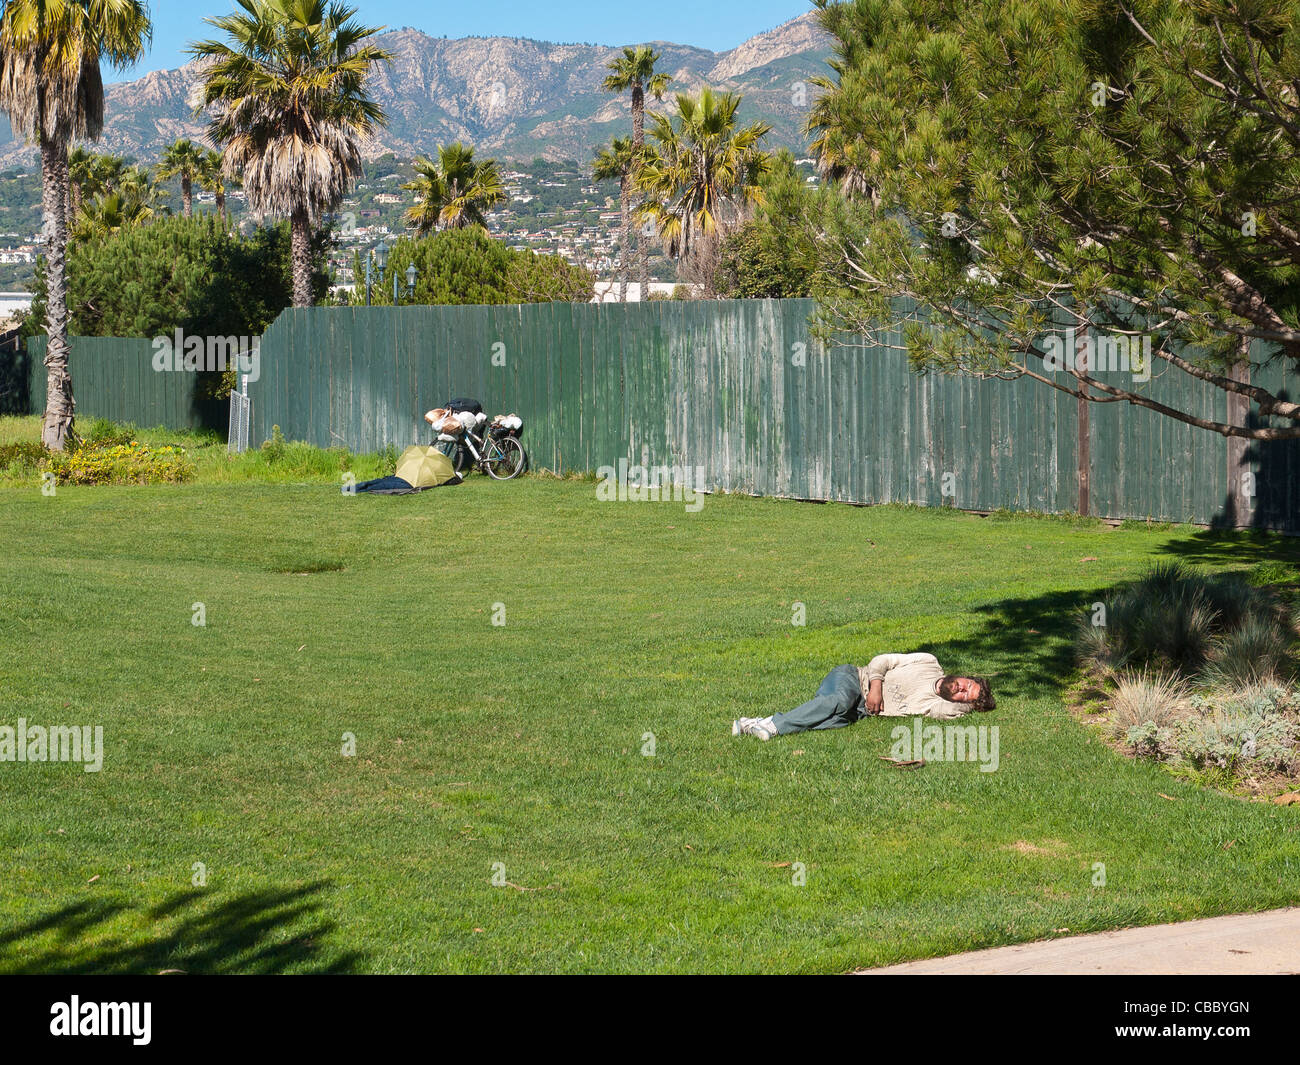 A thirty something homeless man sleeps midday on the green grass of a city park with his bicycle. Stock Photo